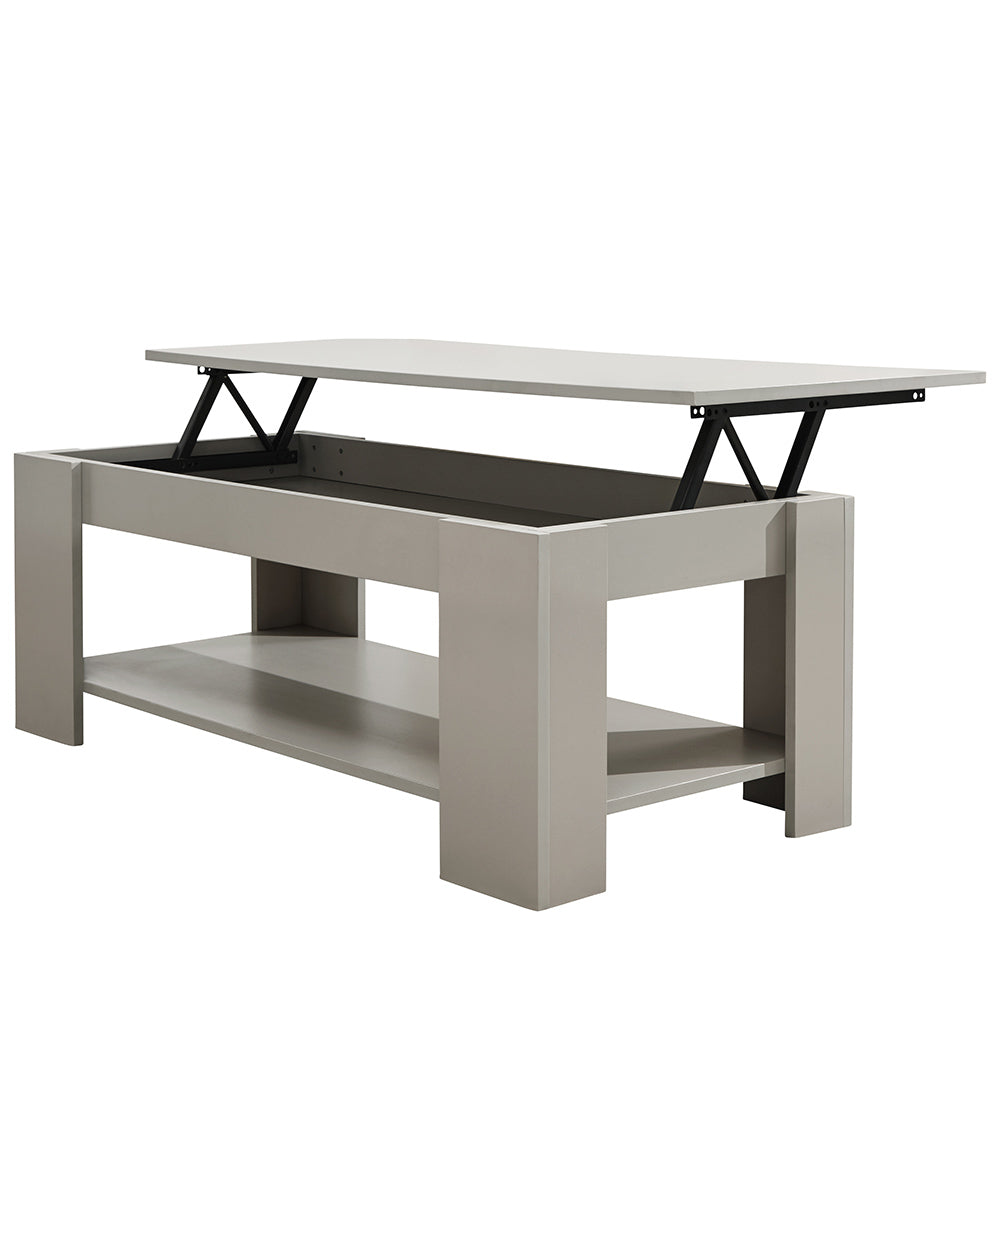 Lift up coffee table in grey on a white background lifted up